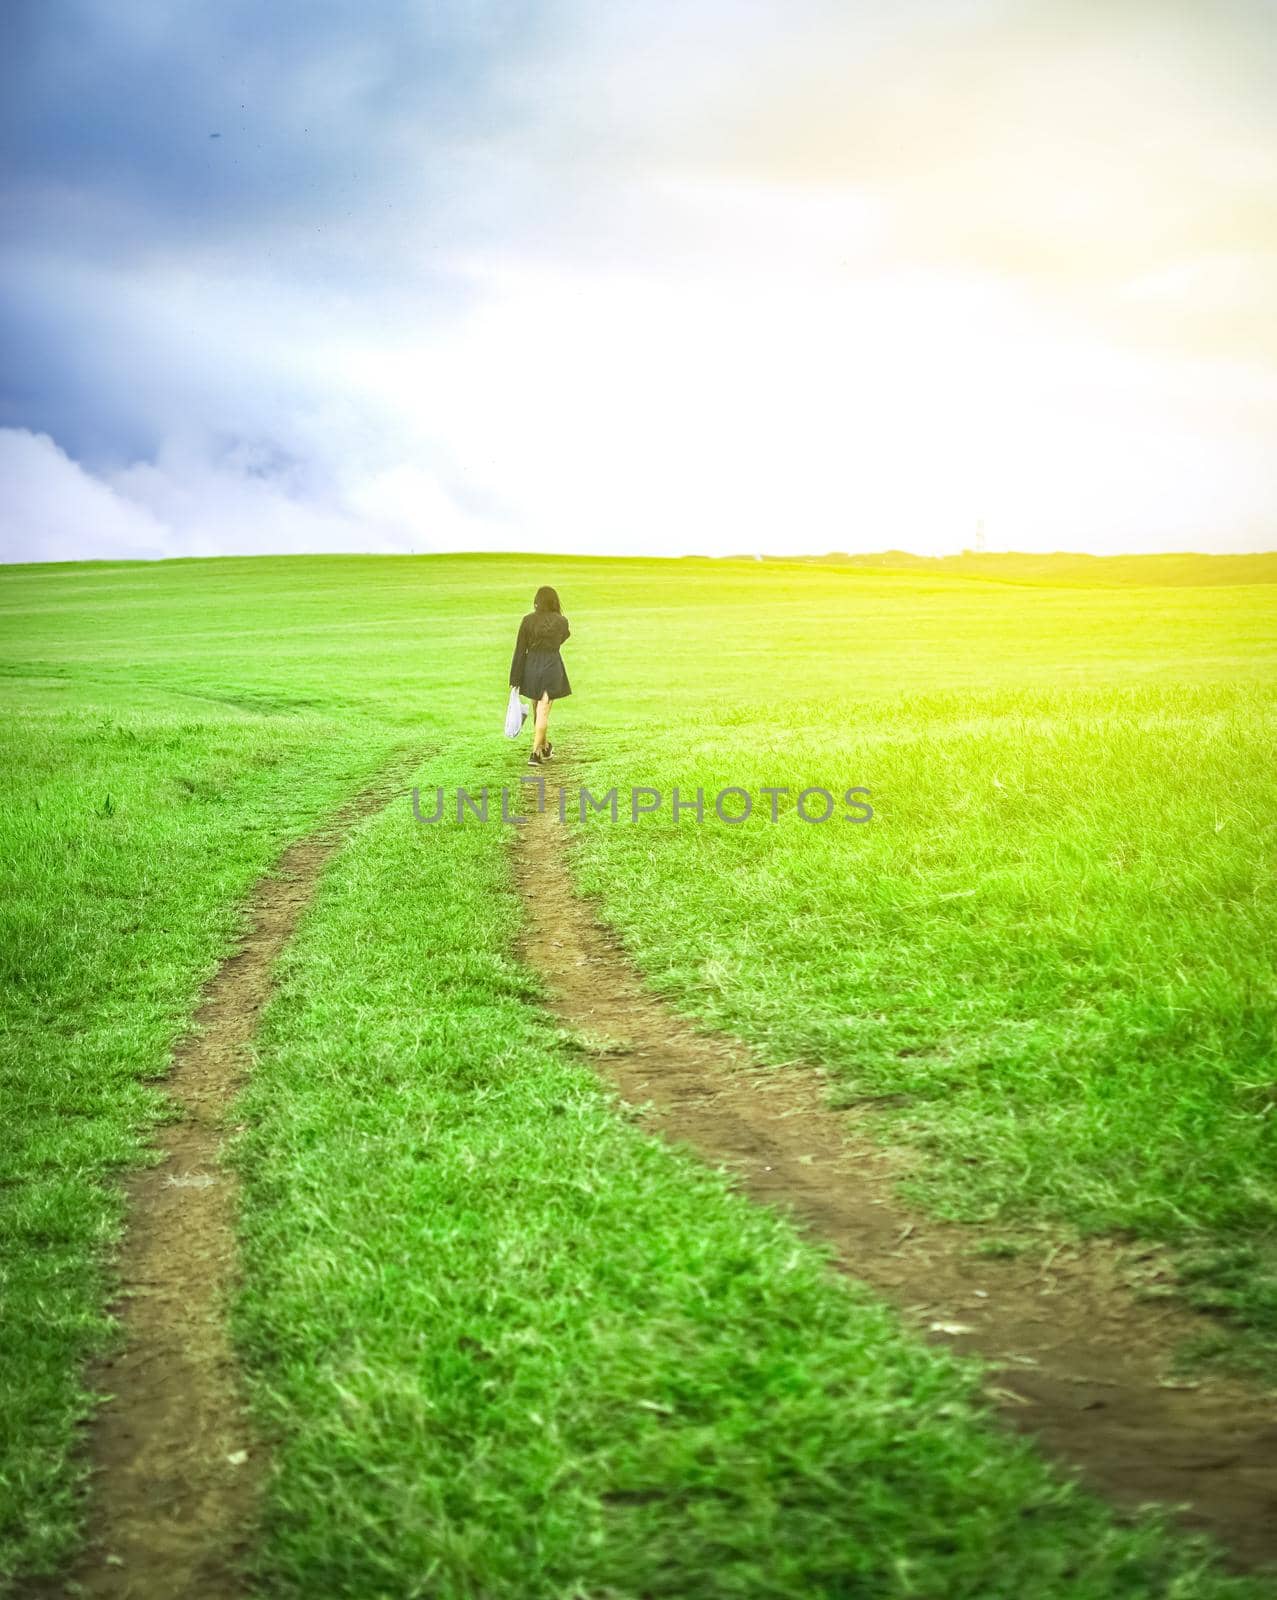 woman walking in the field with shopping bags, woman walking on a road in the field by isaiphoto